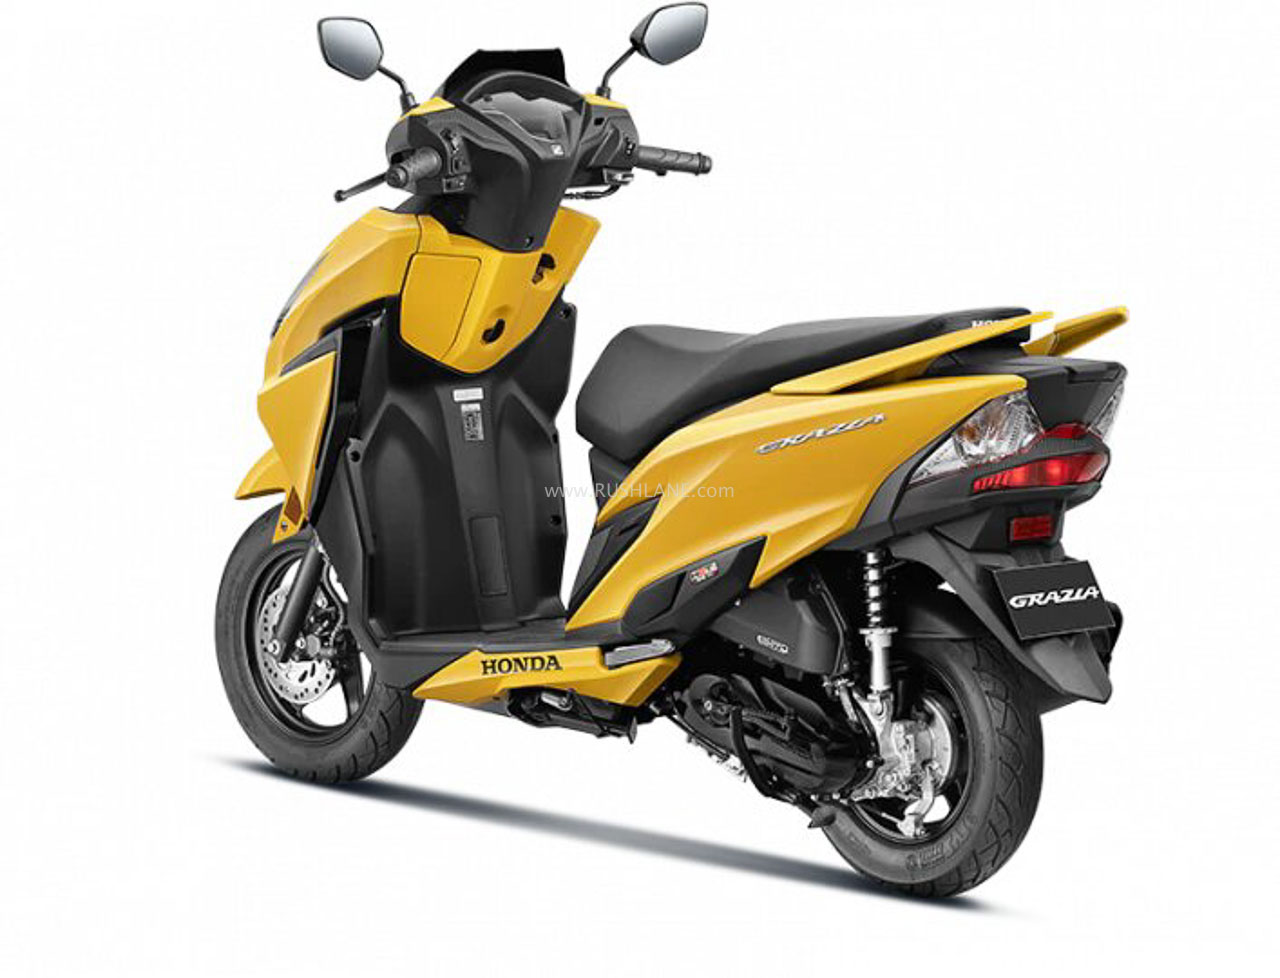 Honda Activa 125 Based Grazia Bs6 Launch Price Rs 11k More Than Bs4